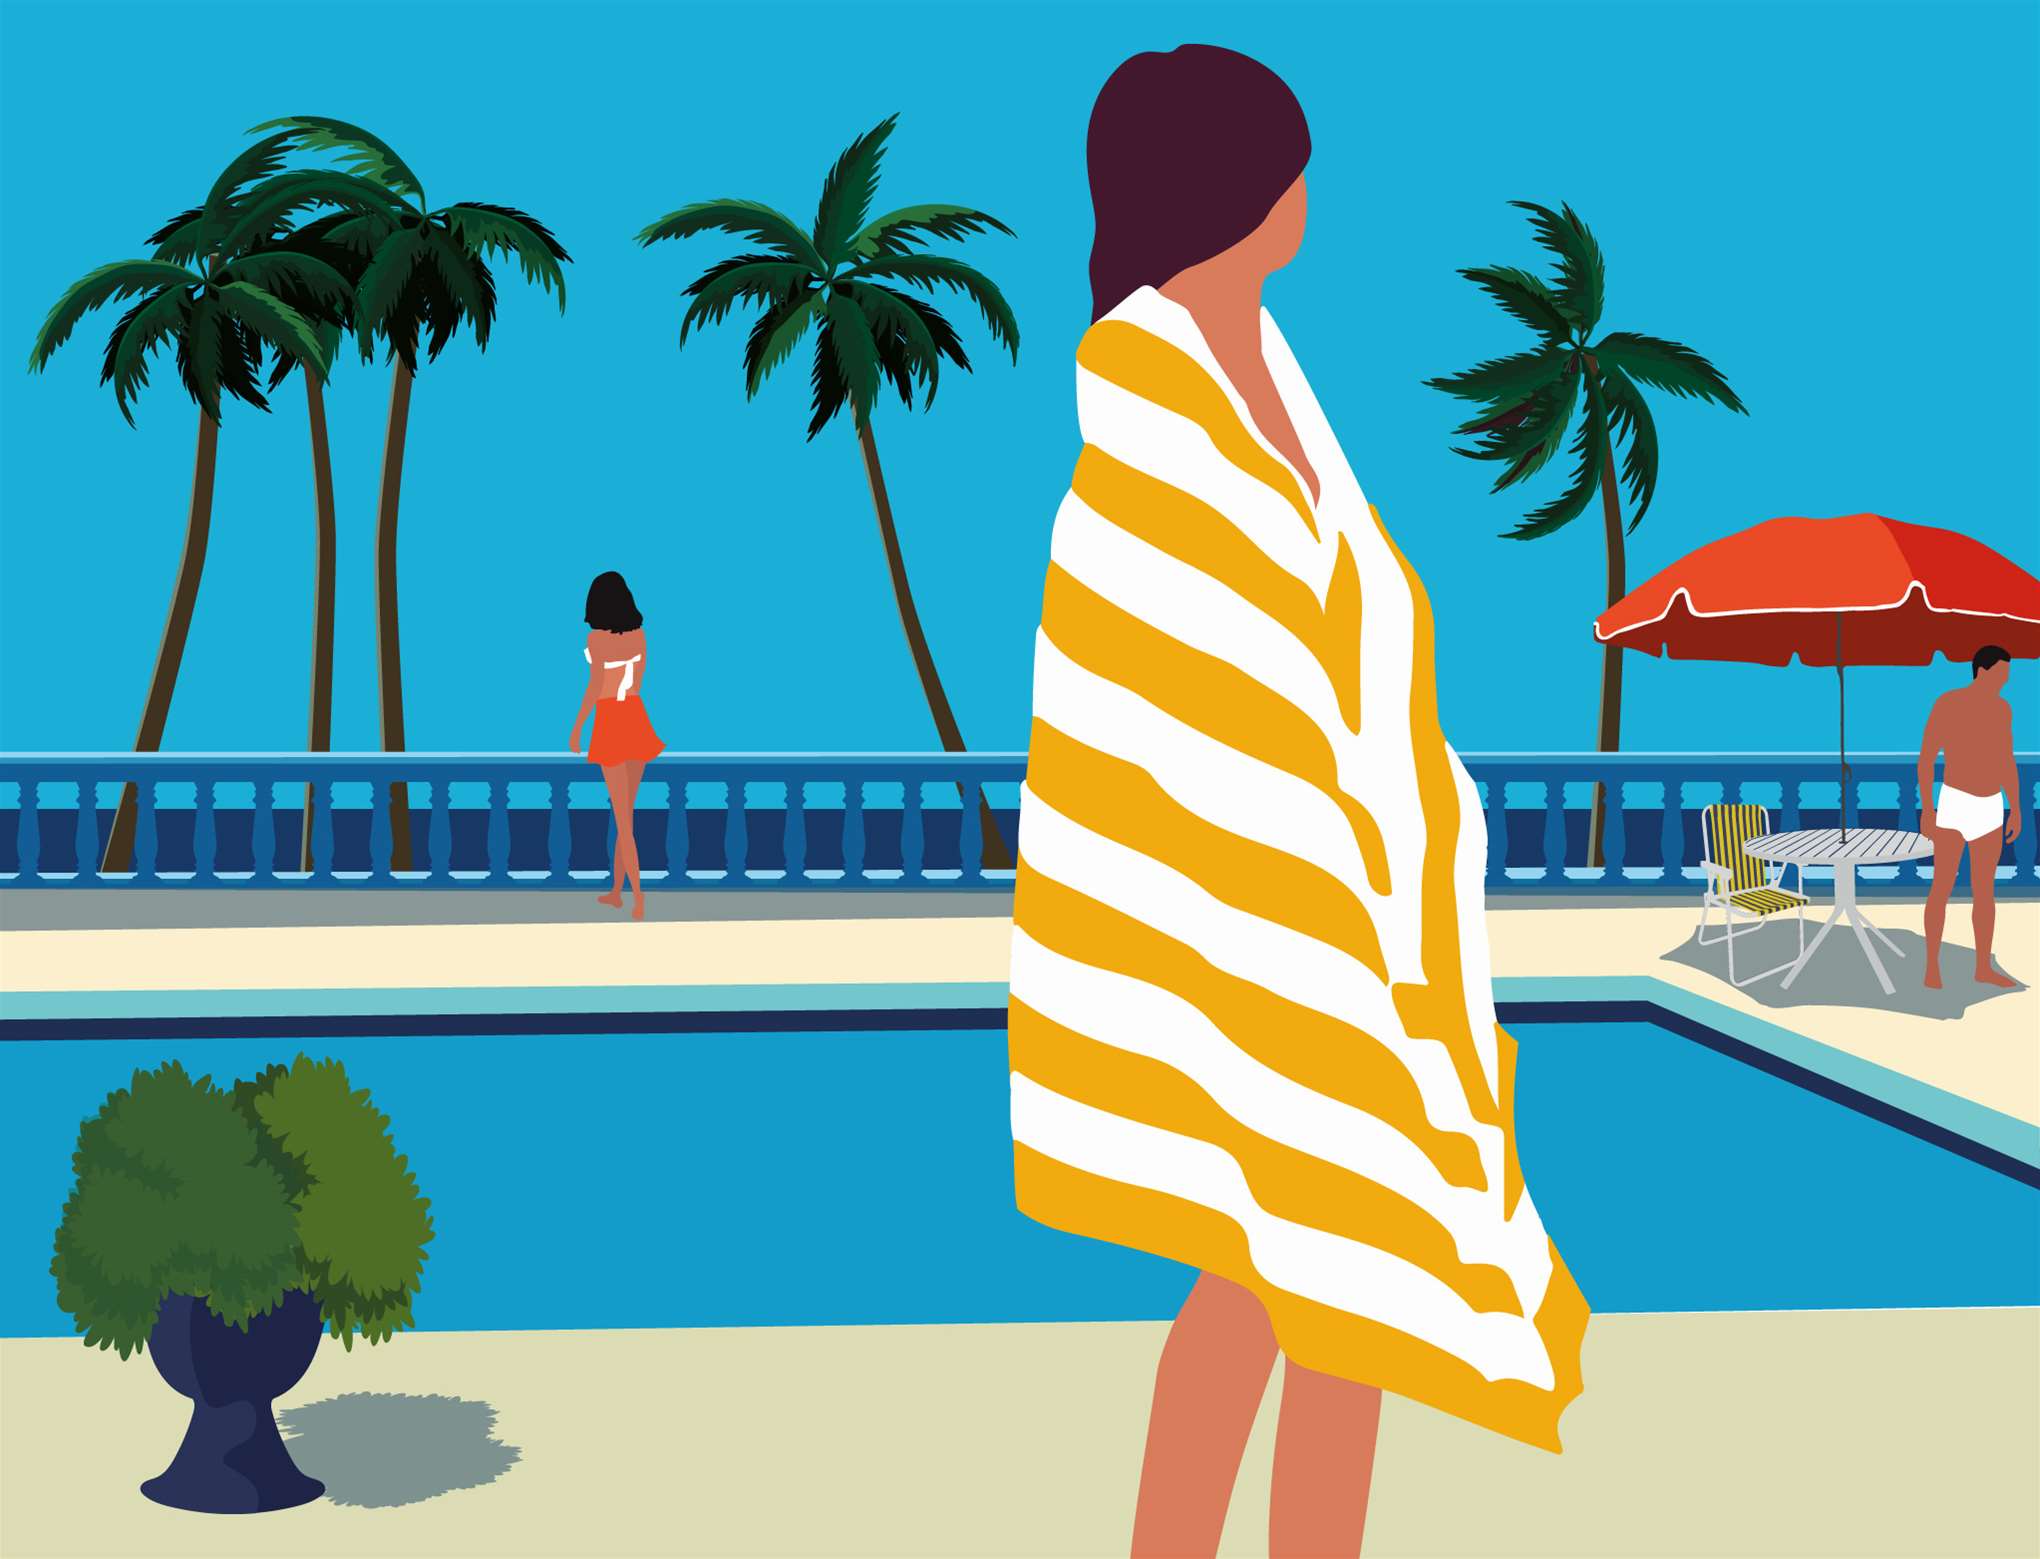 Camila Pinheiro, Bright vector fashion illustration of a woman covered in a towel looking back at tropical landscape, pool and palm trees. 